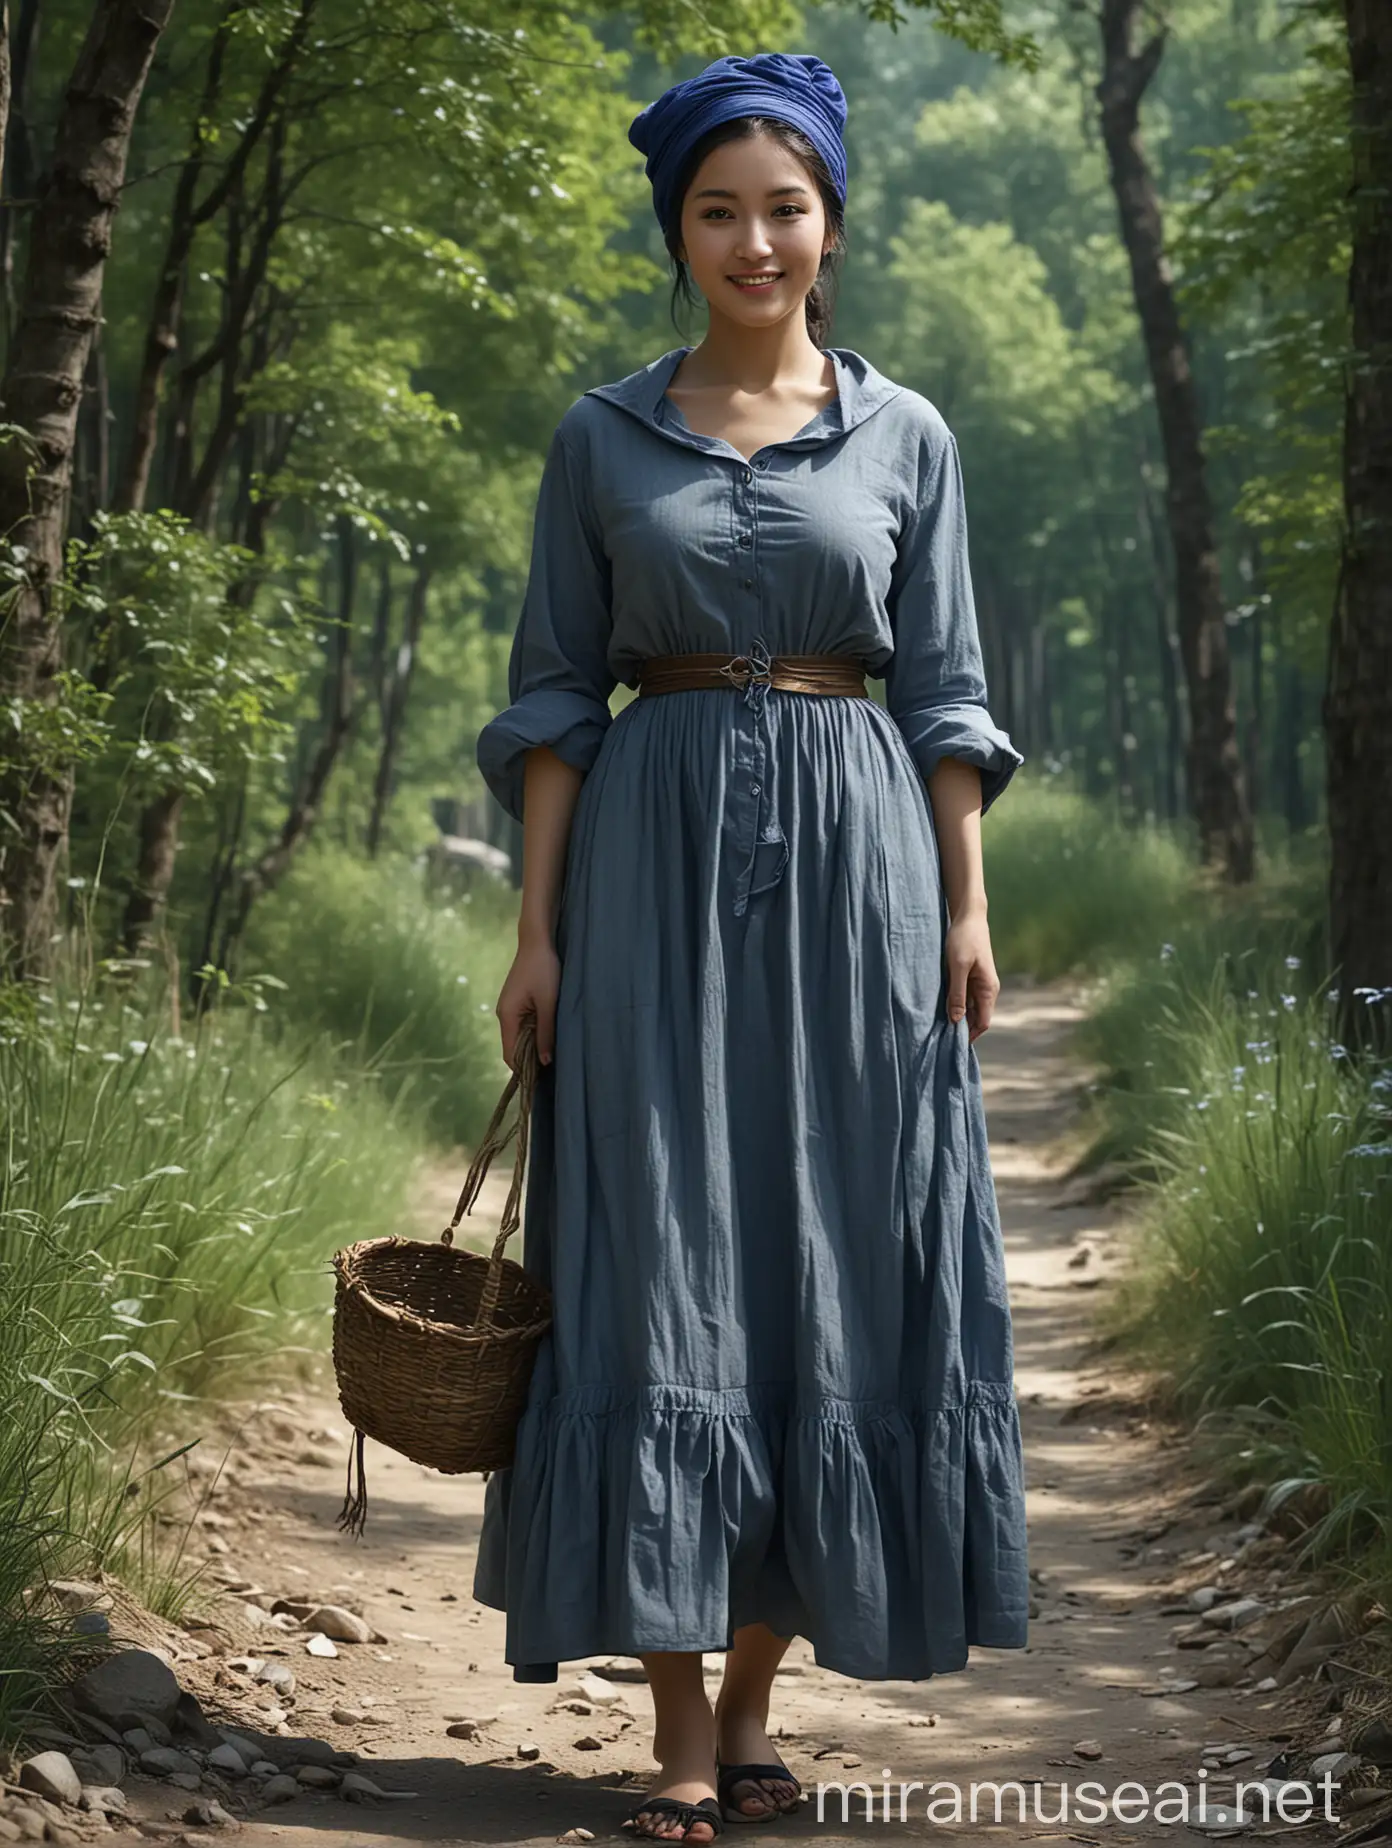 Female: A hardworking and kind woman.nHair: Simple bun of black long hair, with some loose strands naturally falling down.nFashion style: Rustic country style.nClothes color: Deep blue coarse cloth dress.nExpression and posture: Smiling lightly, upright posture, steady and firm steps, carrying a hoe on the shoulder, relaxed and natural.nScene environment: Quiet mountain path, green trees shade, continuous bird chirping.nCharacter decoration: Wearing a blue headscarf on the head.nAccessory: A simple silver bracelet on the wrist.nOptical illusion art, light and dark contrast, texture skin,n(((precise)))，(((very detailed)))，(((high detail)))，(((best quality)))，(((16k)))，(((masterpiece)))，n(((pov)))，nChinese woman，